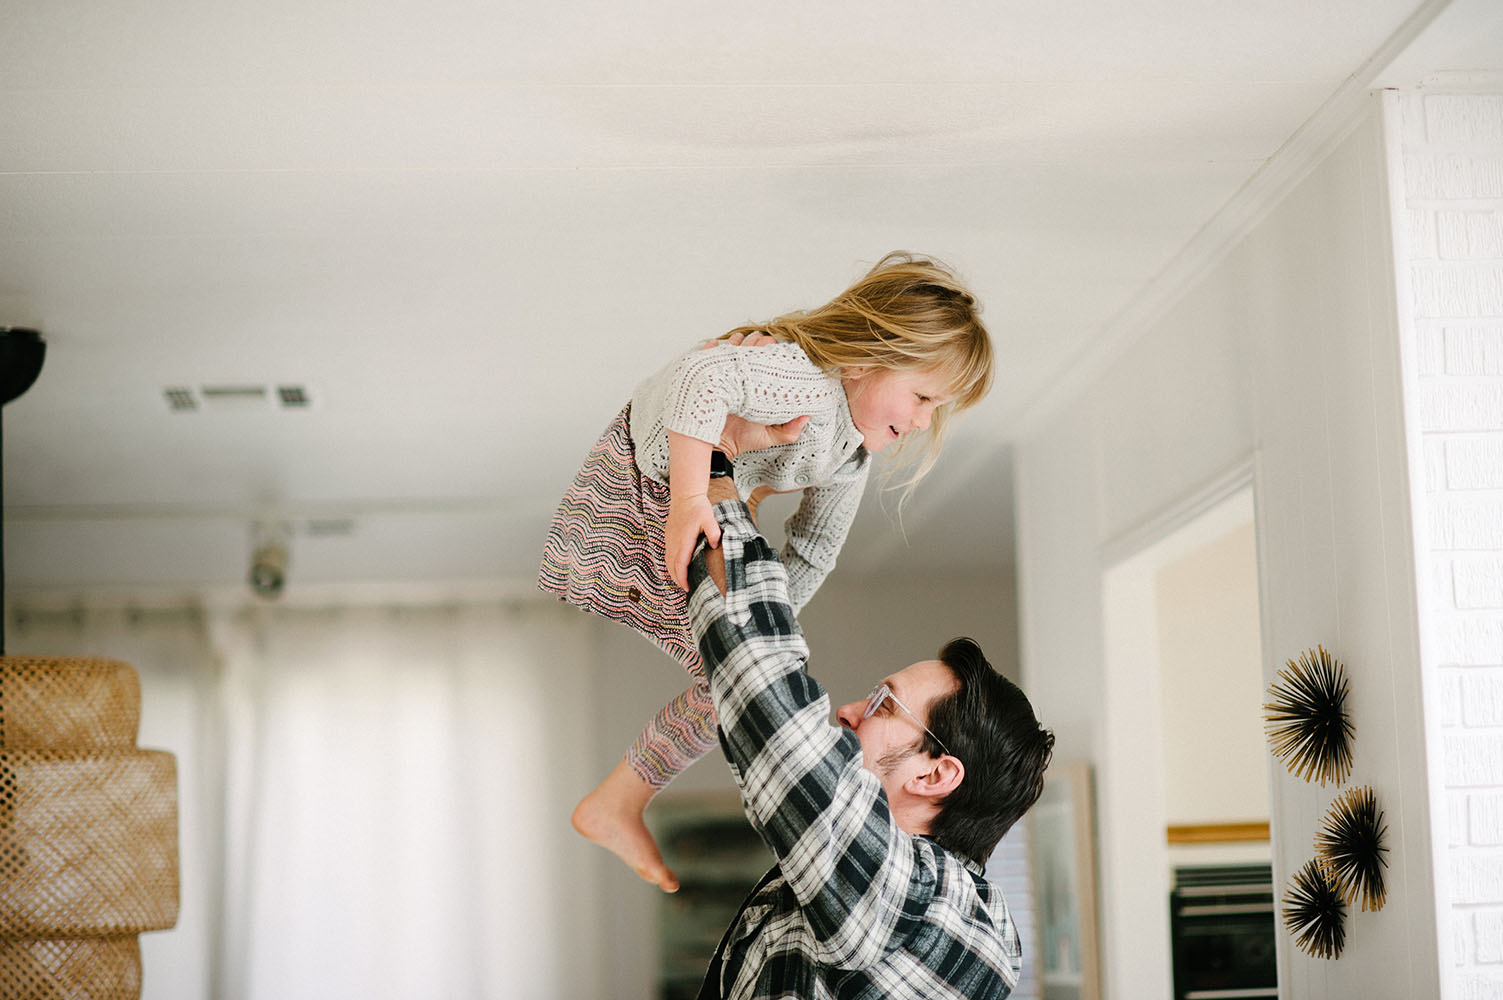 Dad lifting little girl in the air